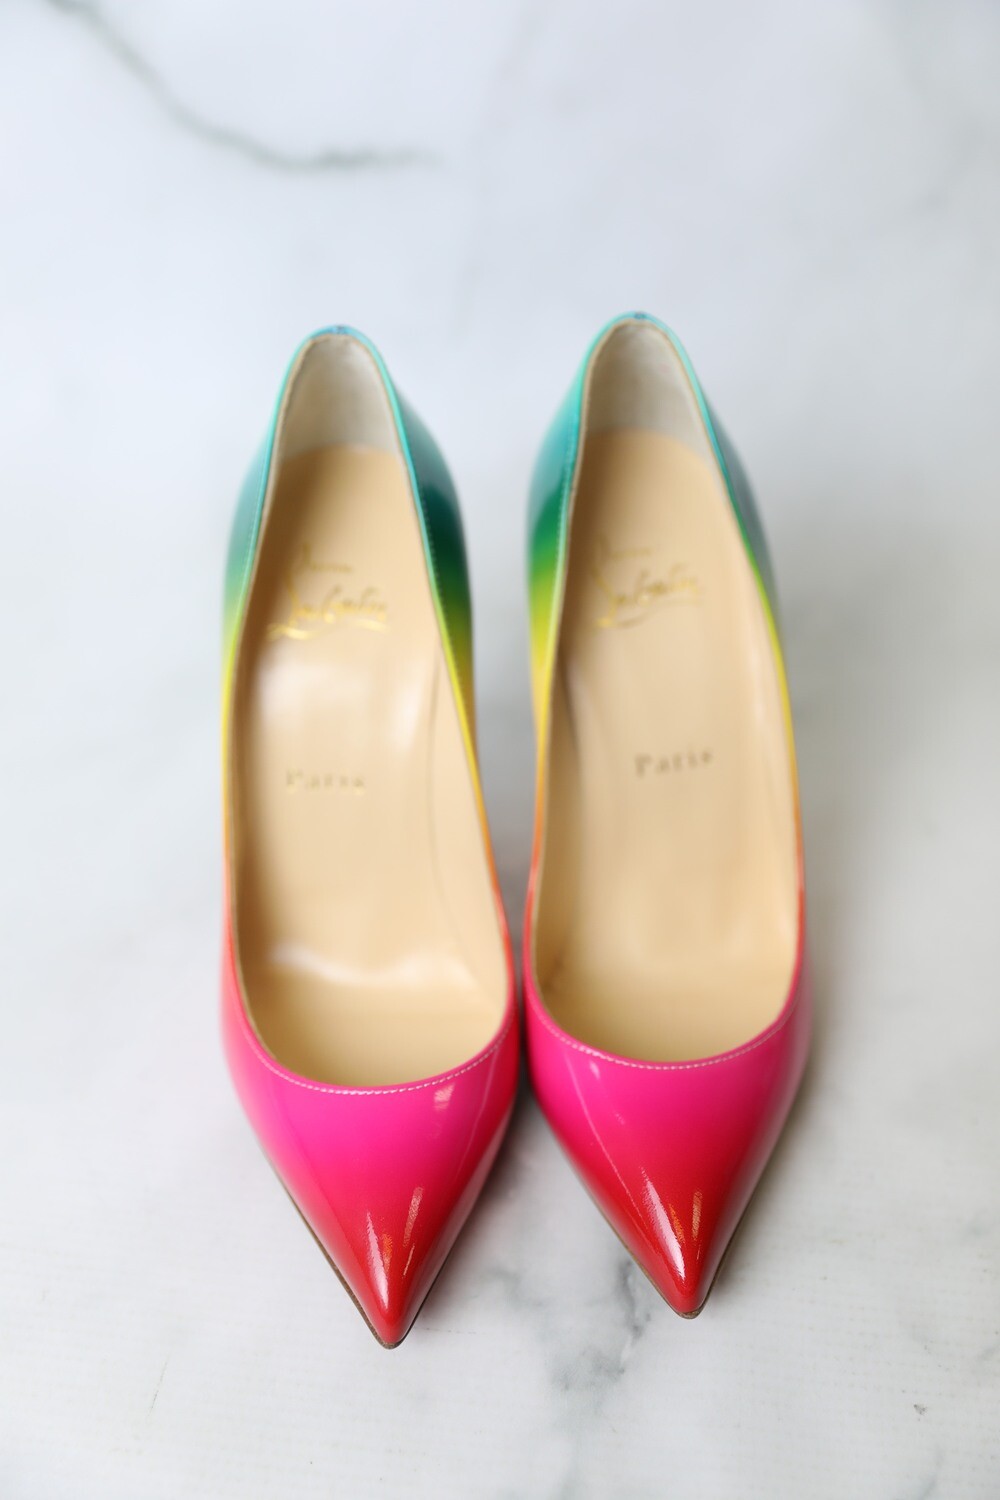 Christian Louboutin Shoes Multicolor Limited Edition Pigalle Follies 100mm  Patent Leather Rainbow Pumps, New in Box